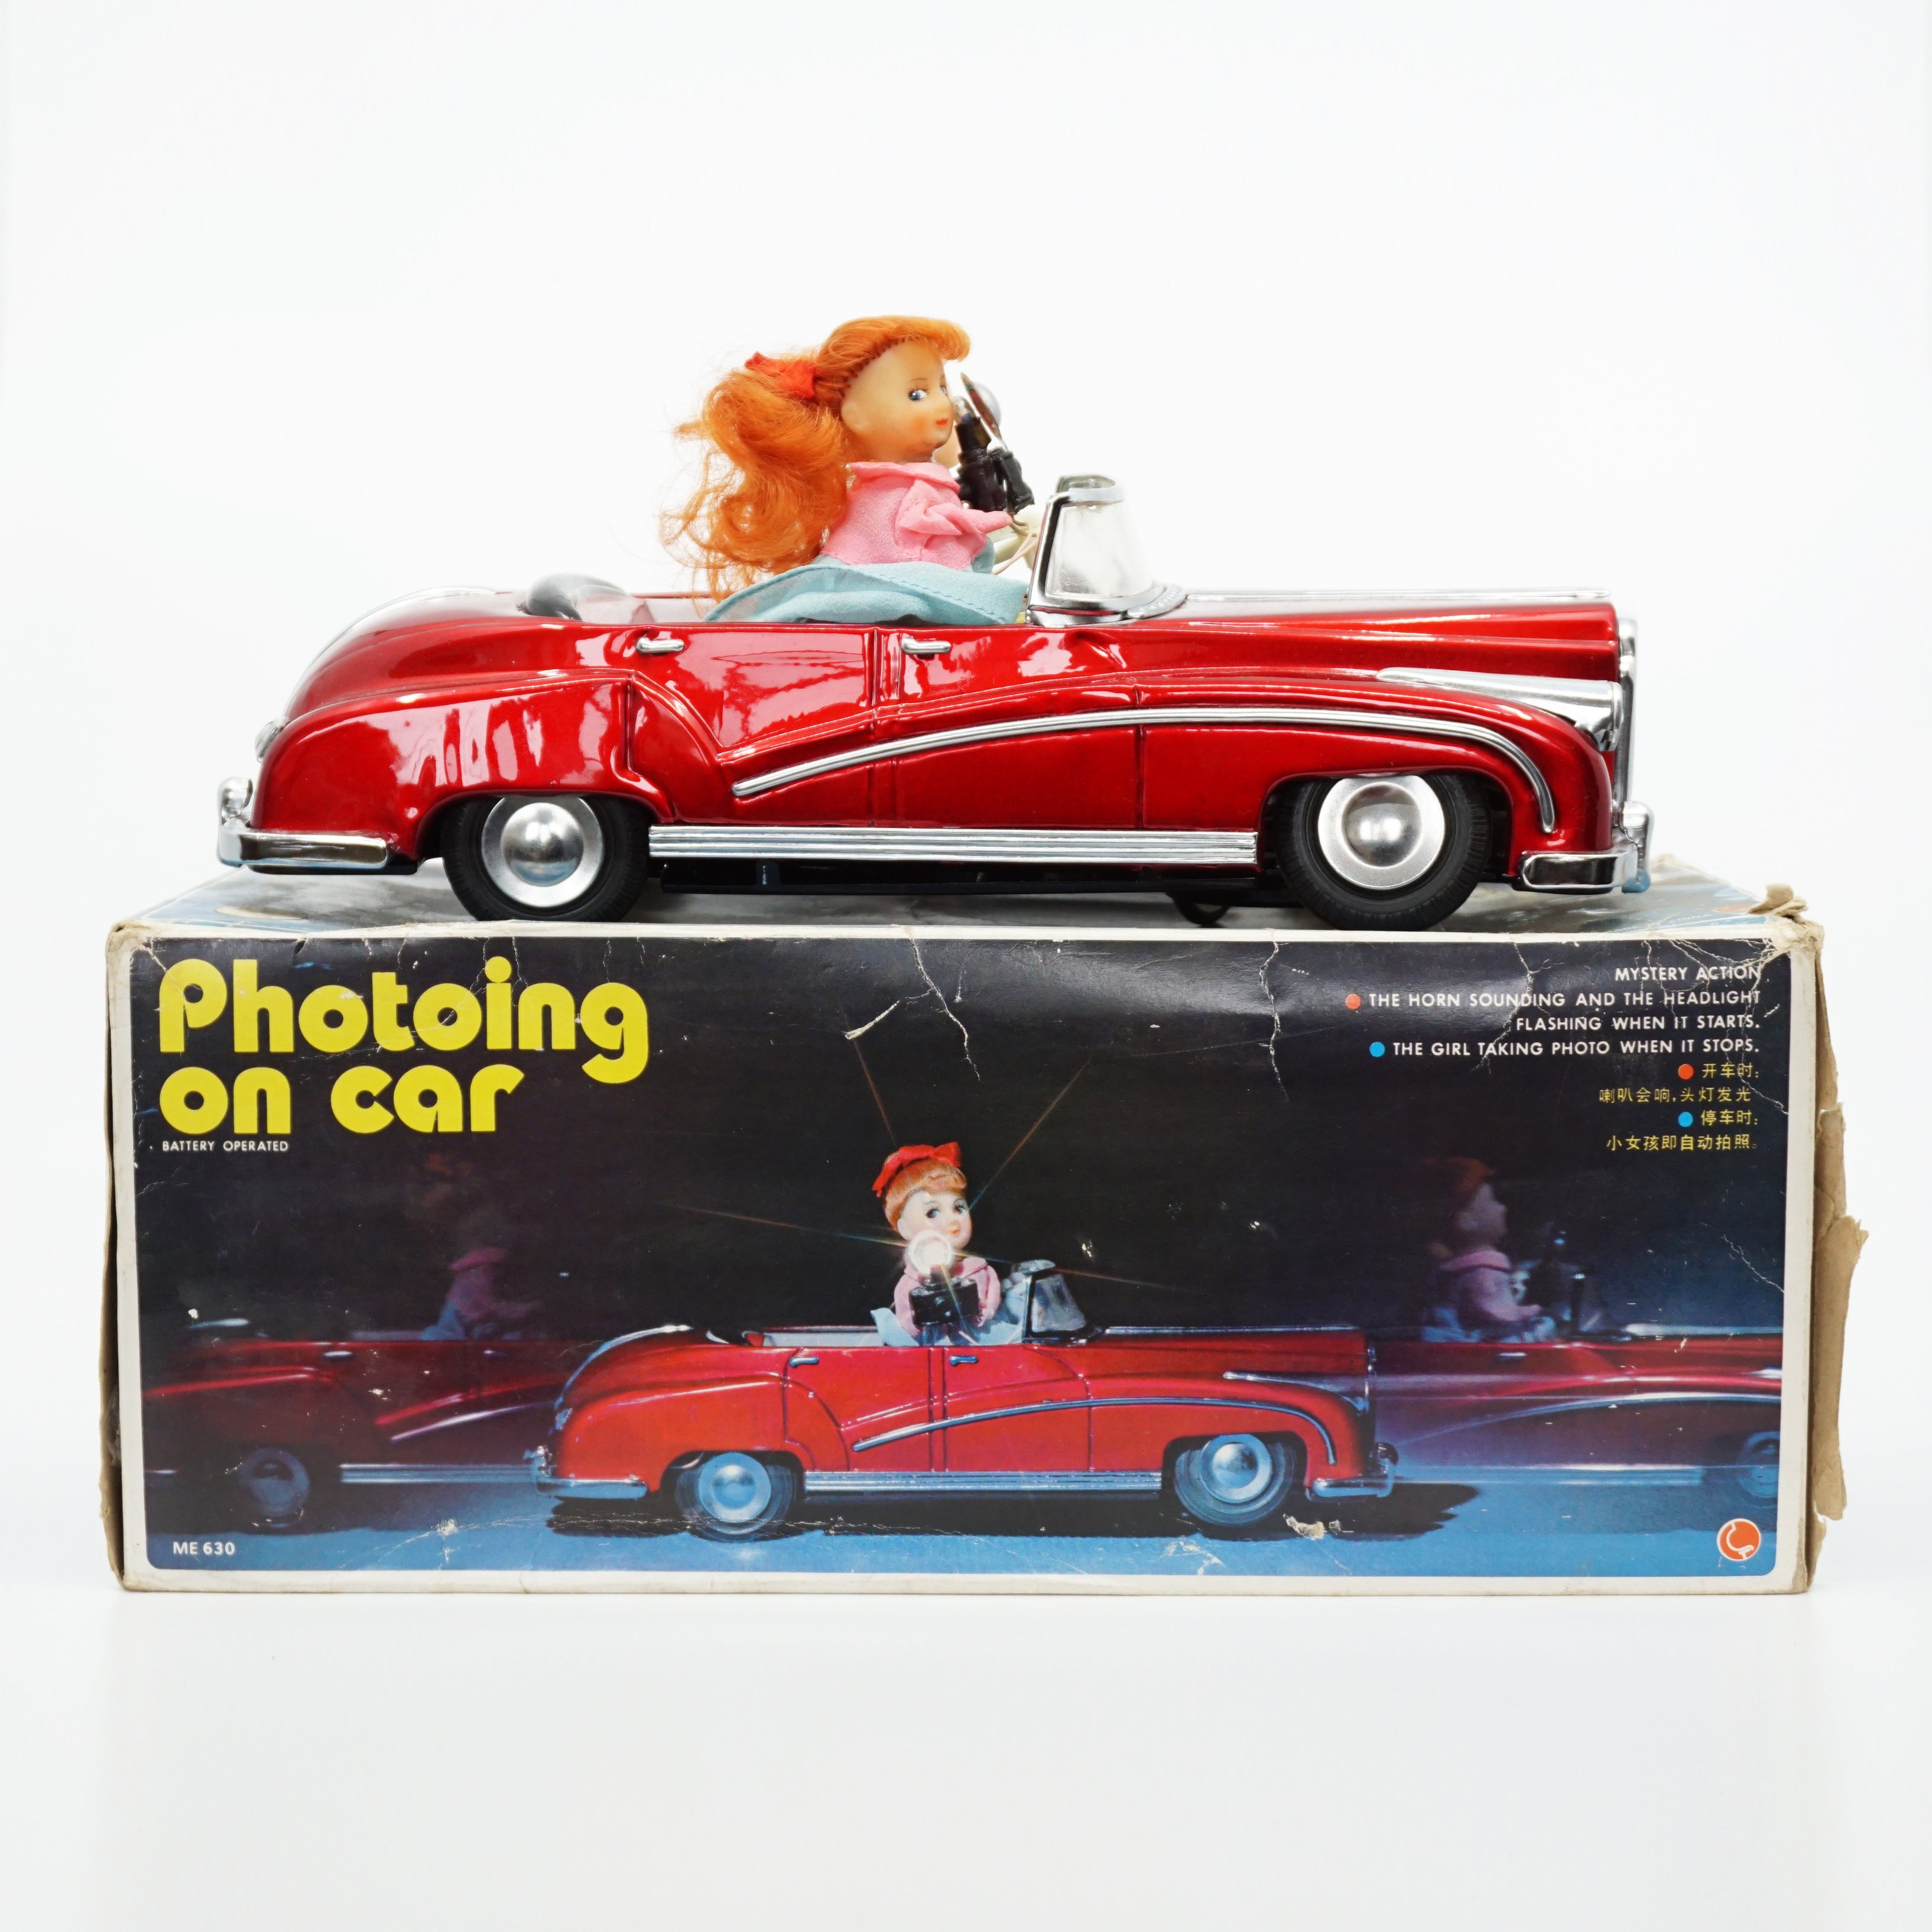 1950s Vintage Tin Litho CRAGSTAN TOYS Red Police Car #78. Made in